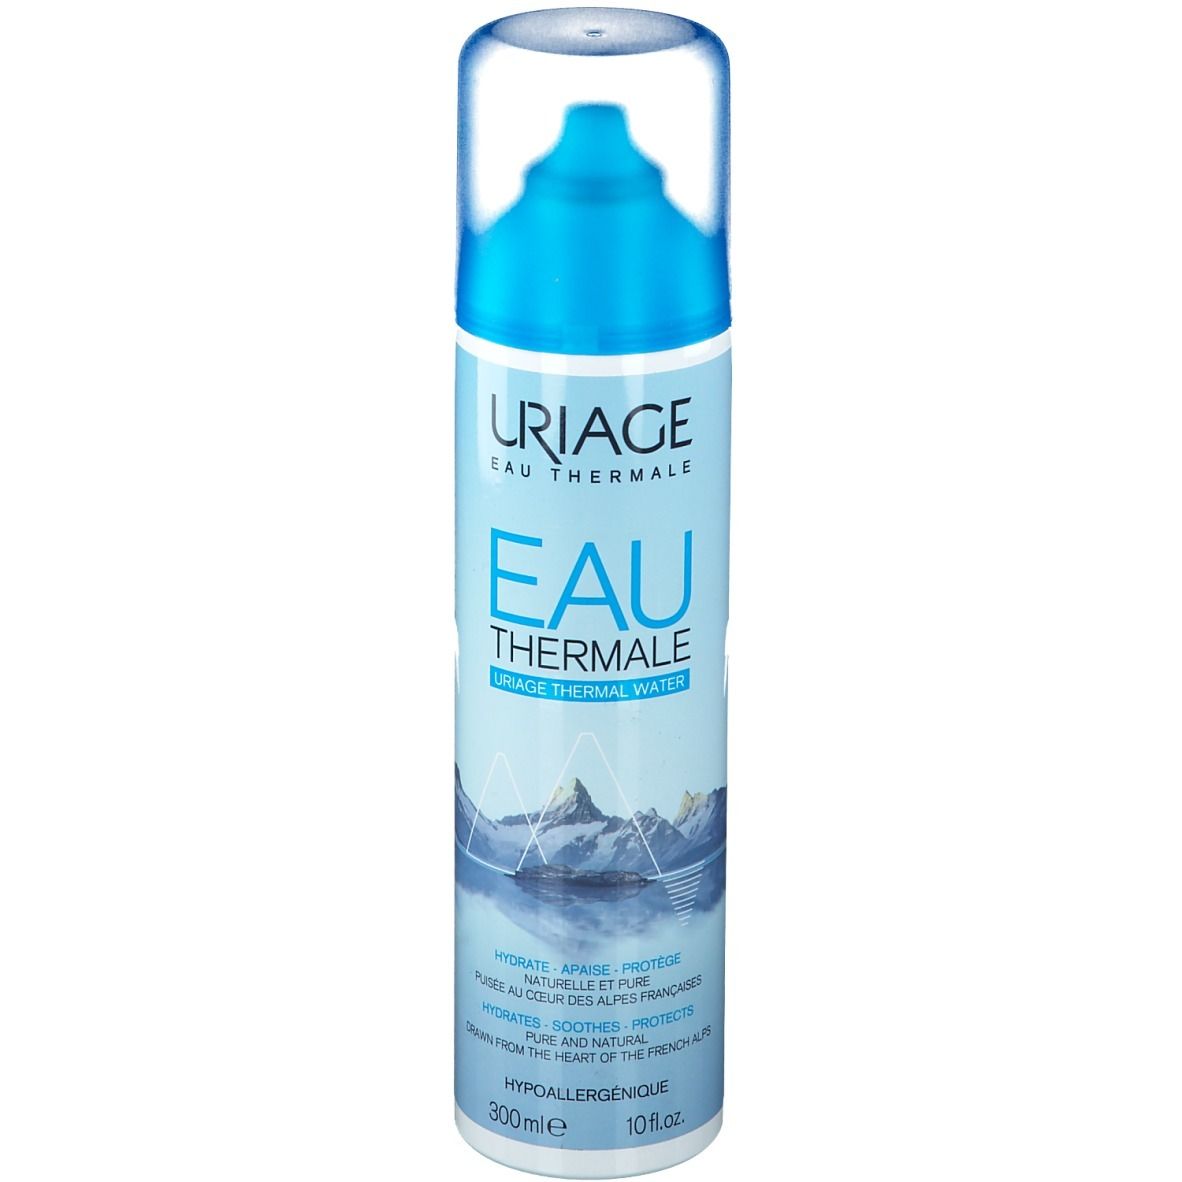 URIAGE Eau Thermale Spray